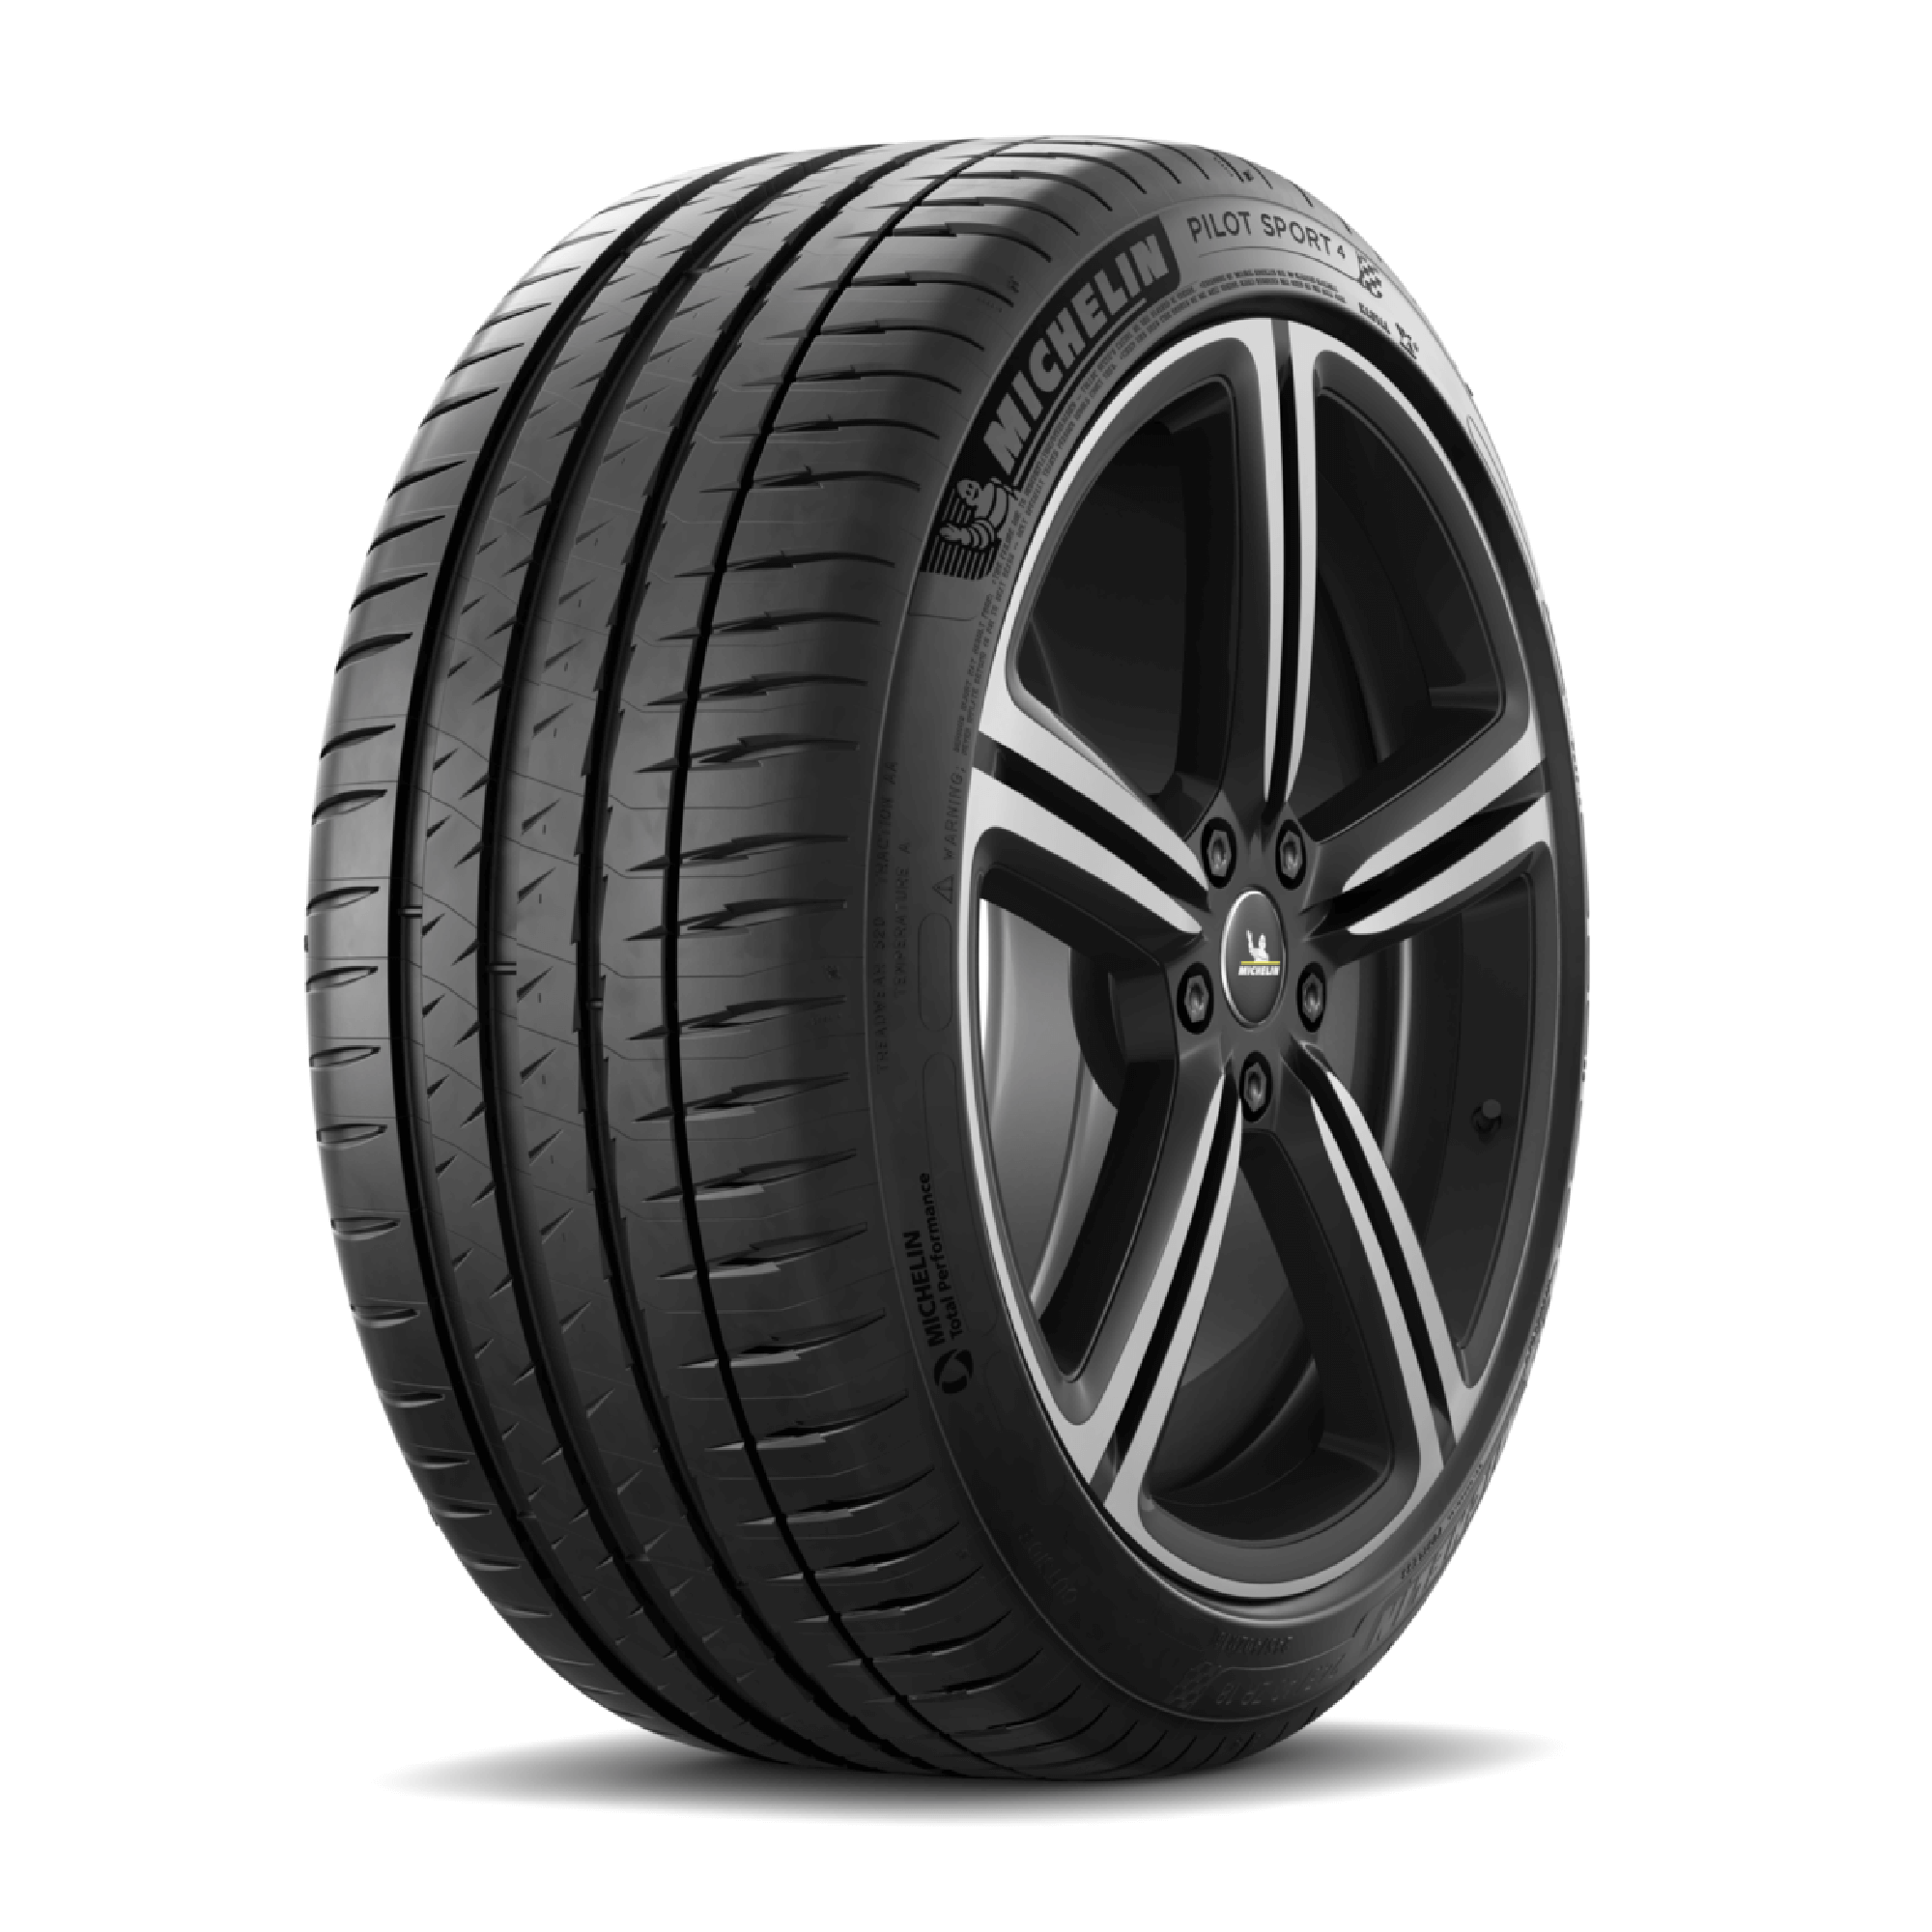 Anvelope jeep MICHELIN PS4 SUV MO1 XL XL MERCEDES 275/45 R21 110Y